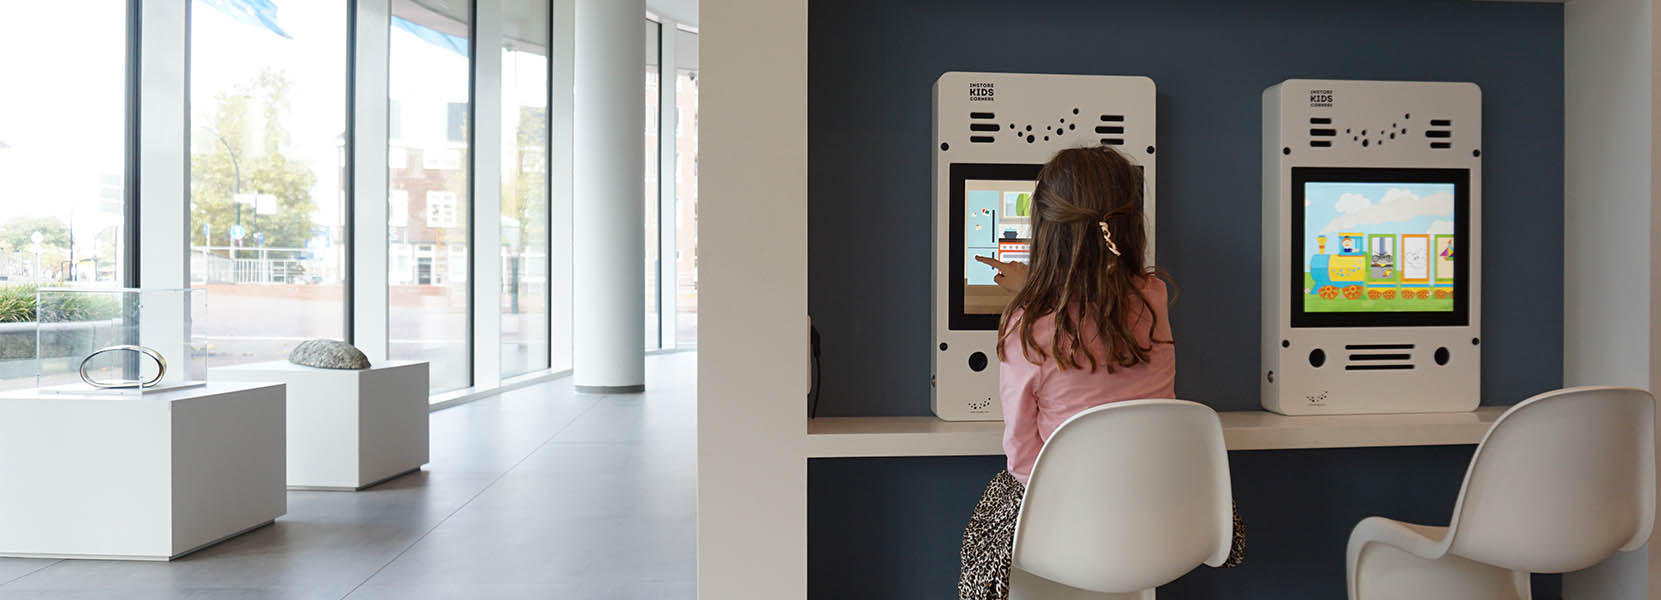 On this image you can see an interactive play system in a public area